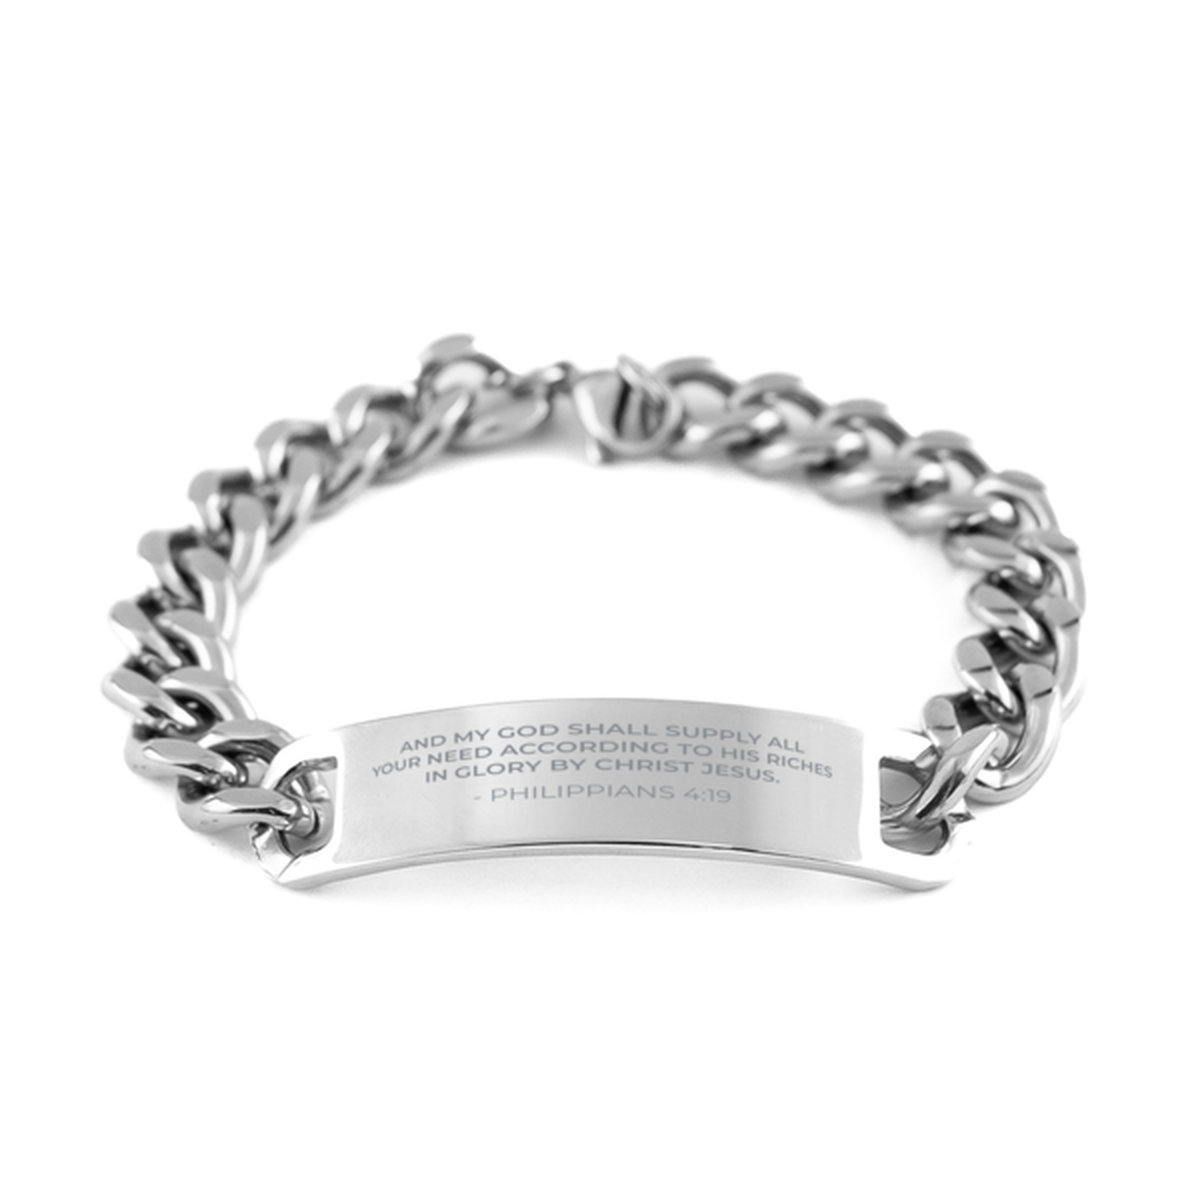 Bible Verse Chain Stainless Steel Bracelet, Philippians 4:19 And My God Shall Supply All Your Need According, Inspirational Christian Gifts For Men Women